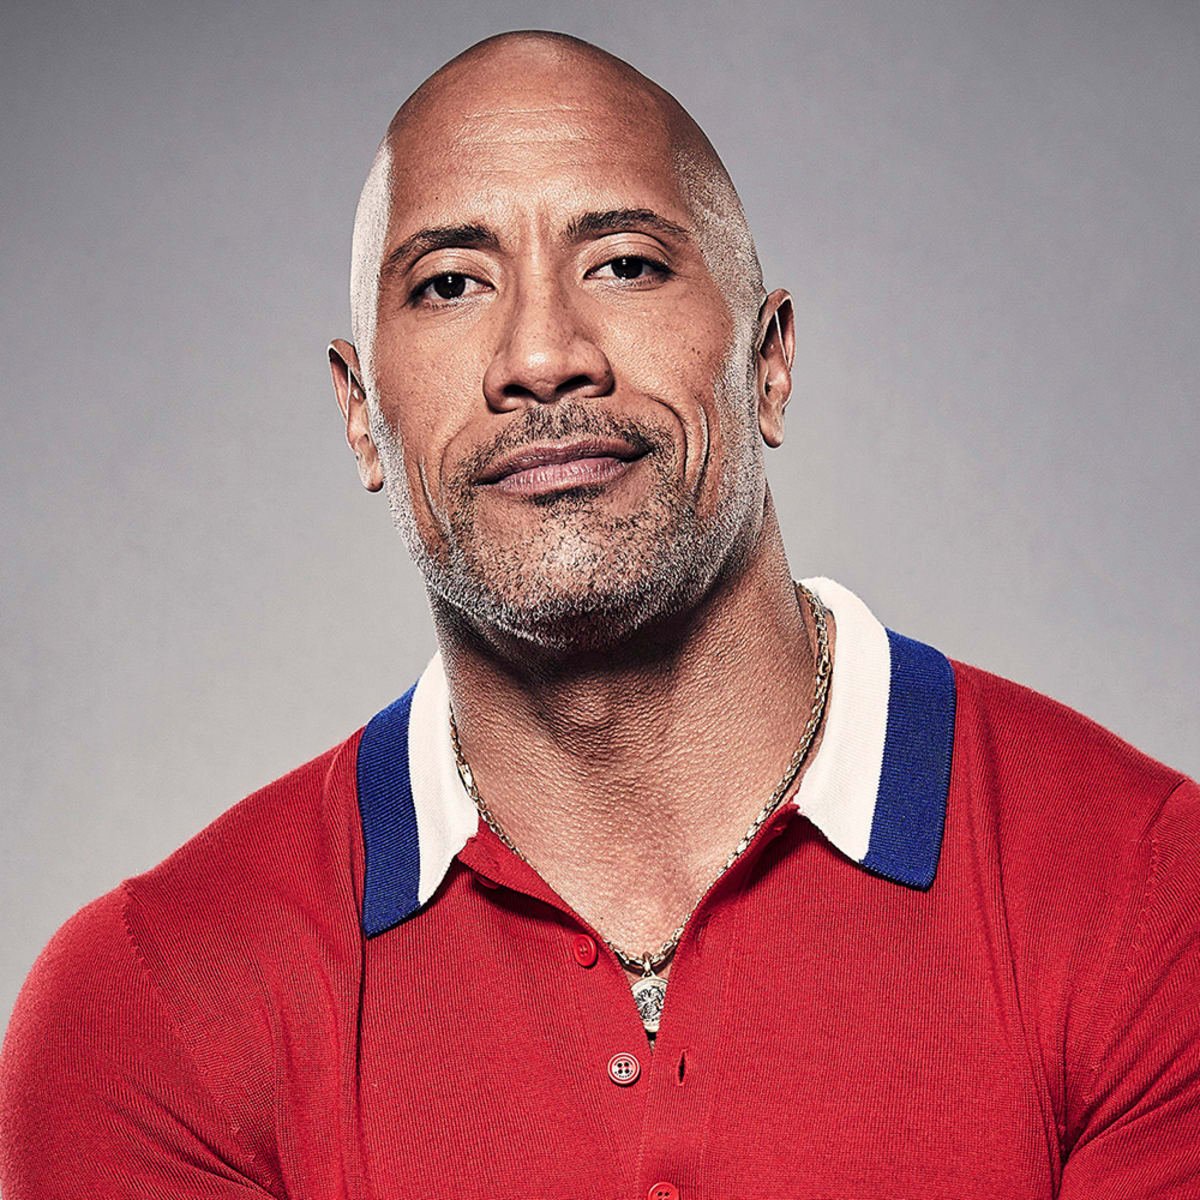 Dwayne Johnson donated his car to a fan who did a lot of humanitarian work